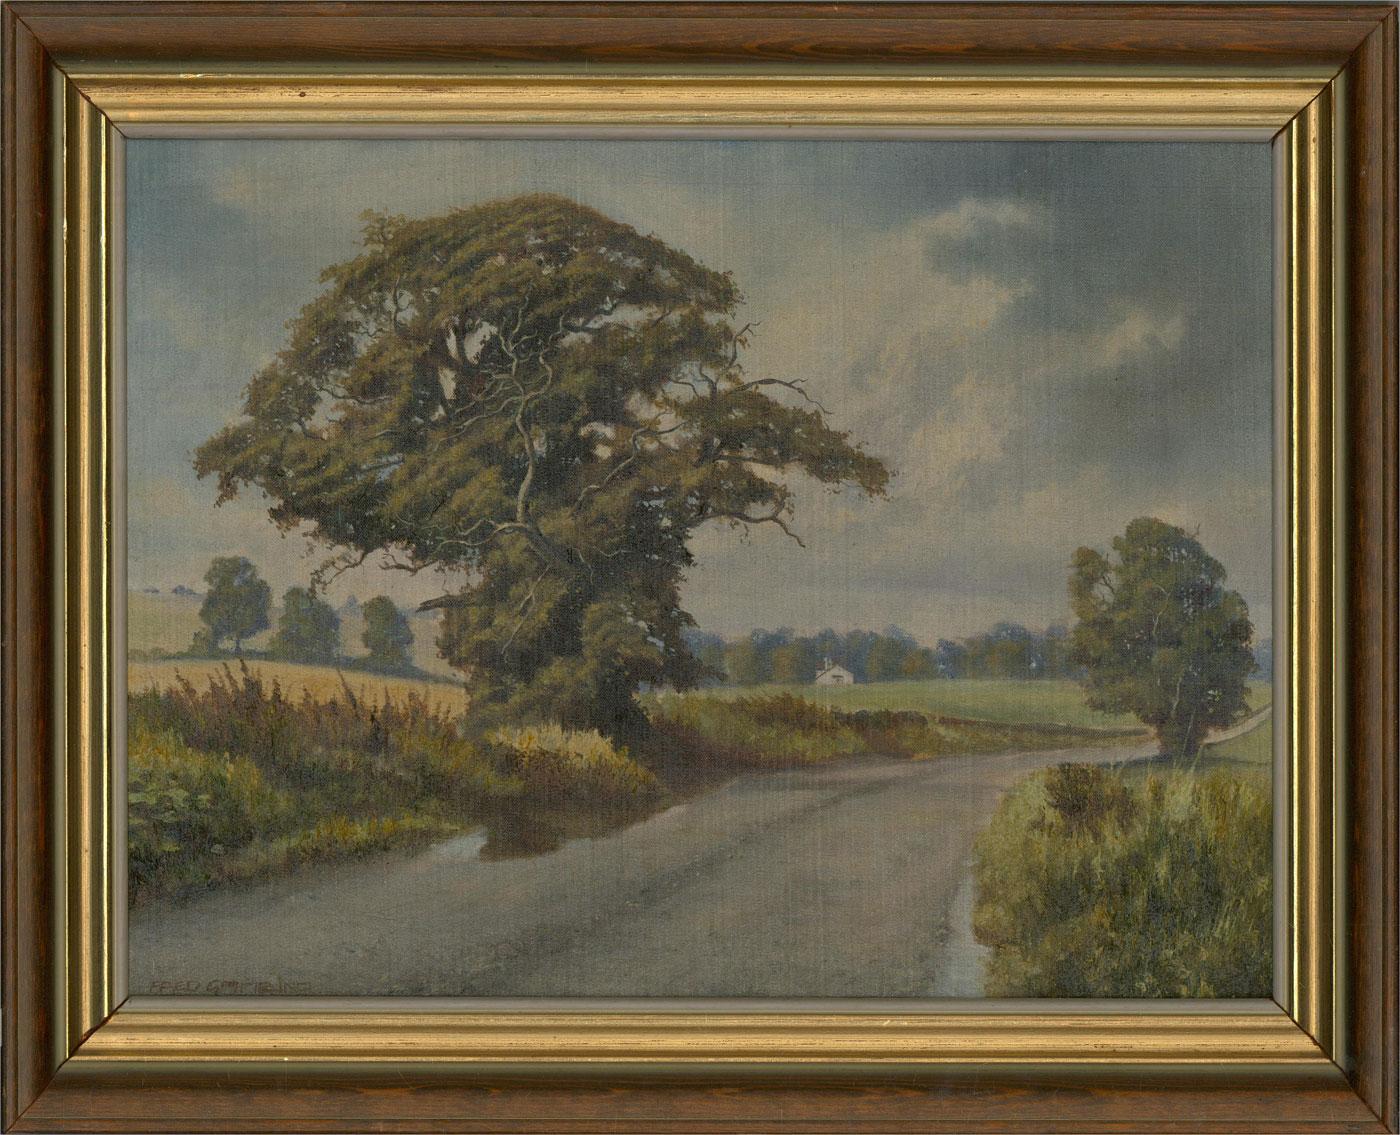 A scene in the English countryside, featuring an old tree with gnarled branches and patchwork fields beyond. Presented in a wooden frame with a gilt-effect inner window. Signed to the lower-left edge. On canvas on stretchers.
